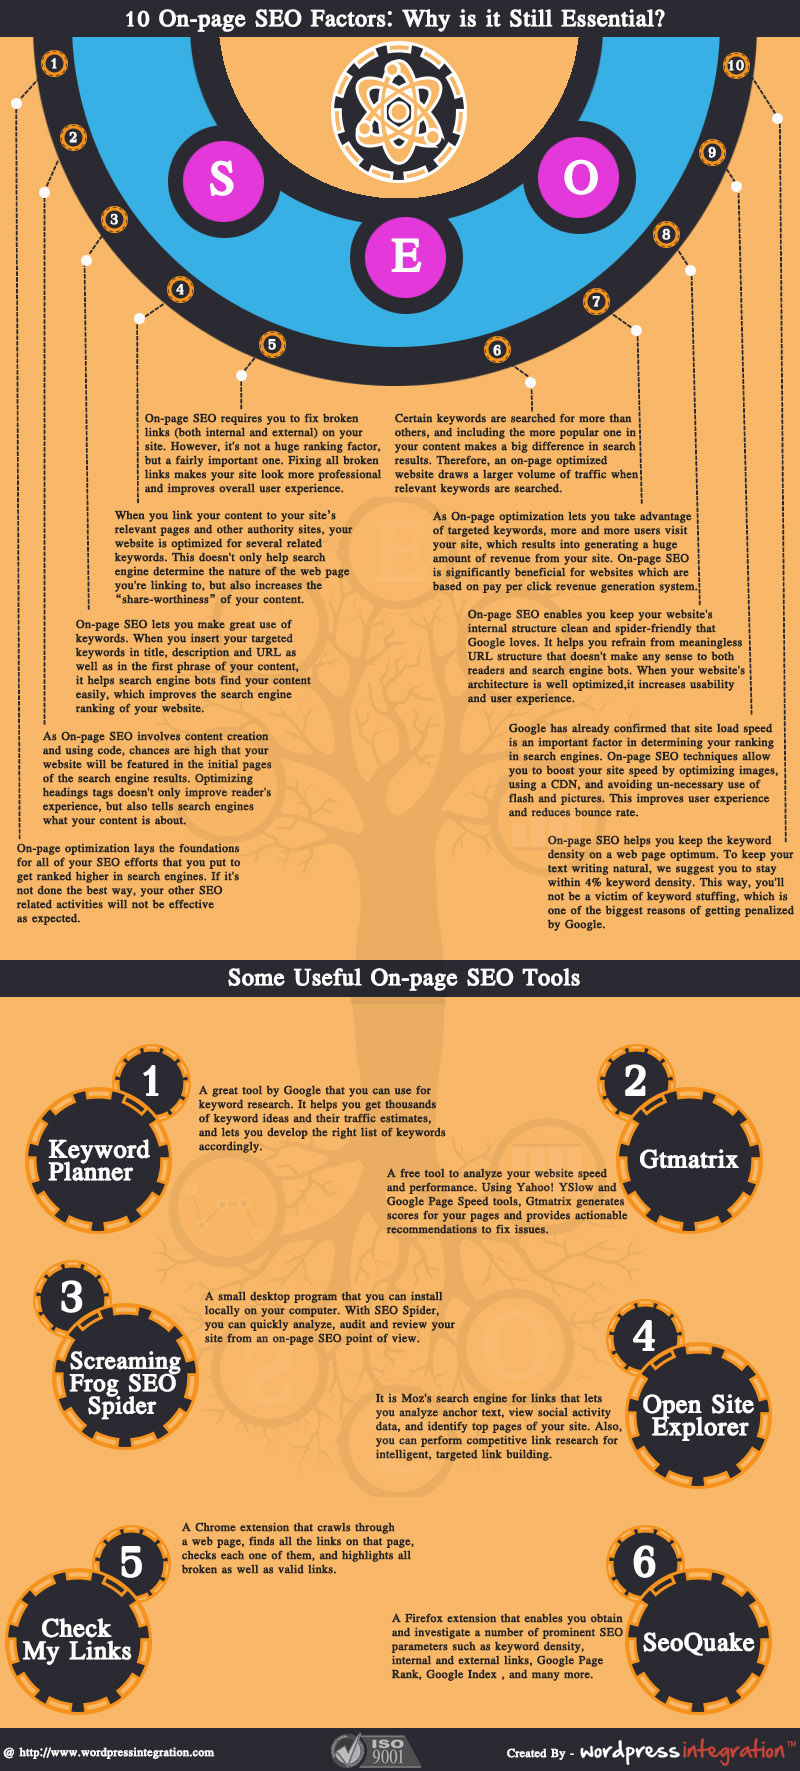 On-page SEO Factors